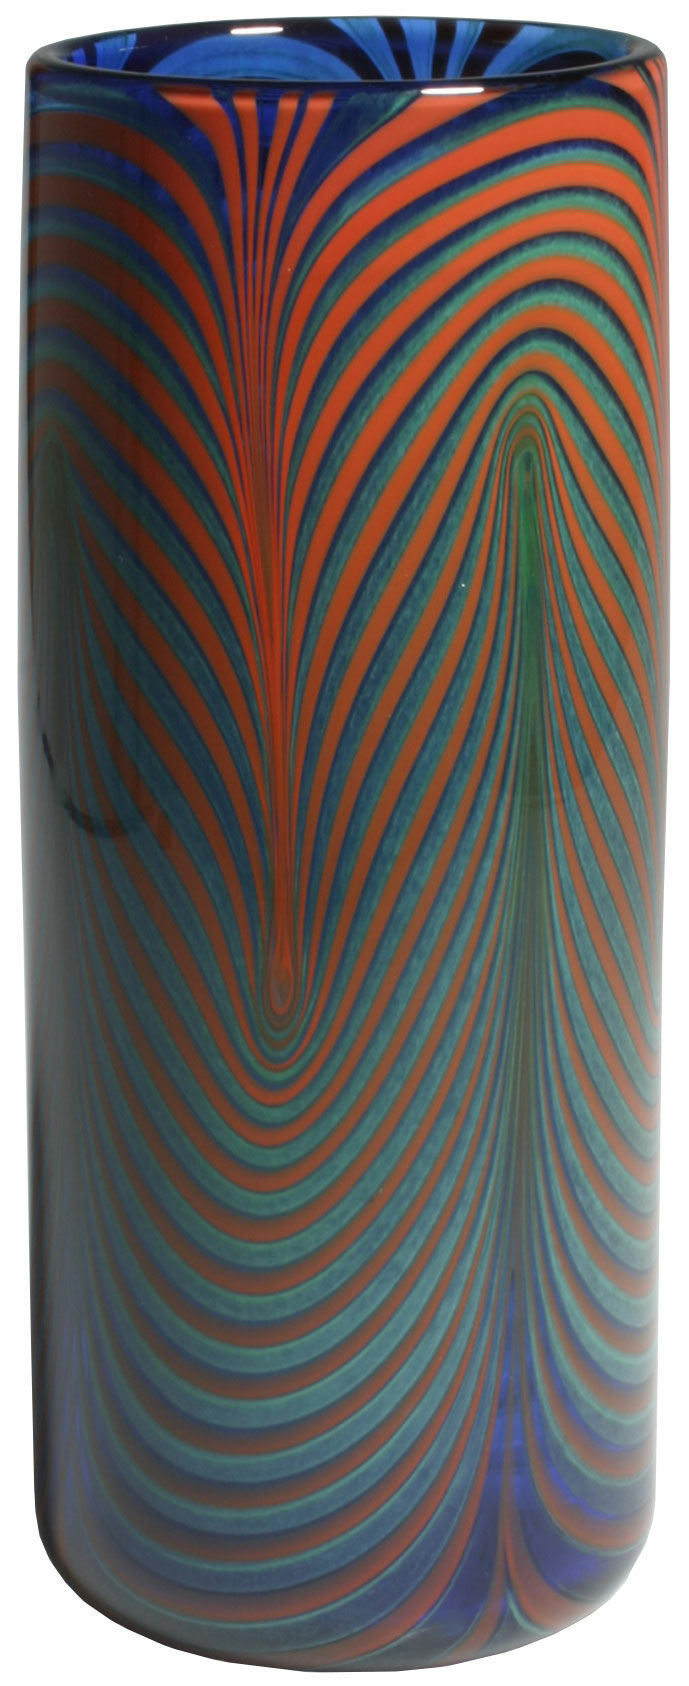 Glass vase "Waves of Colour" by Hans Wudy